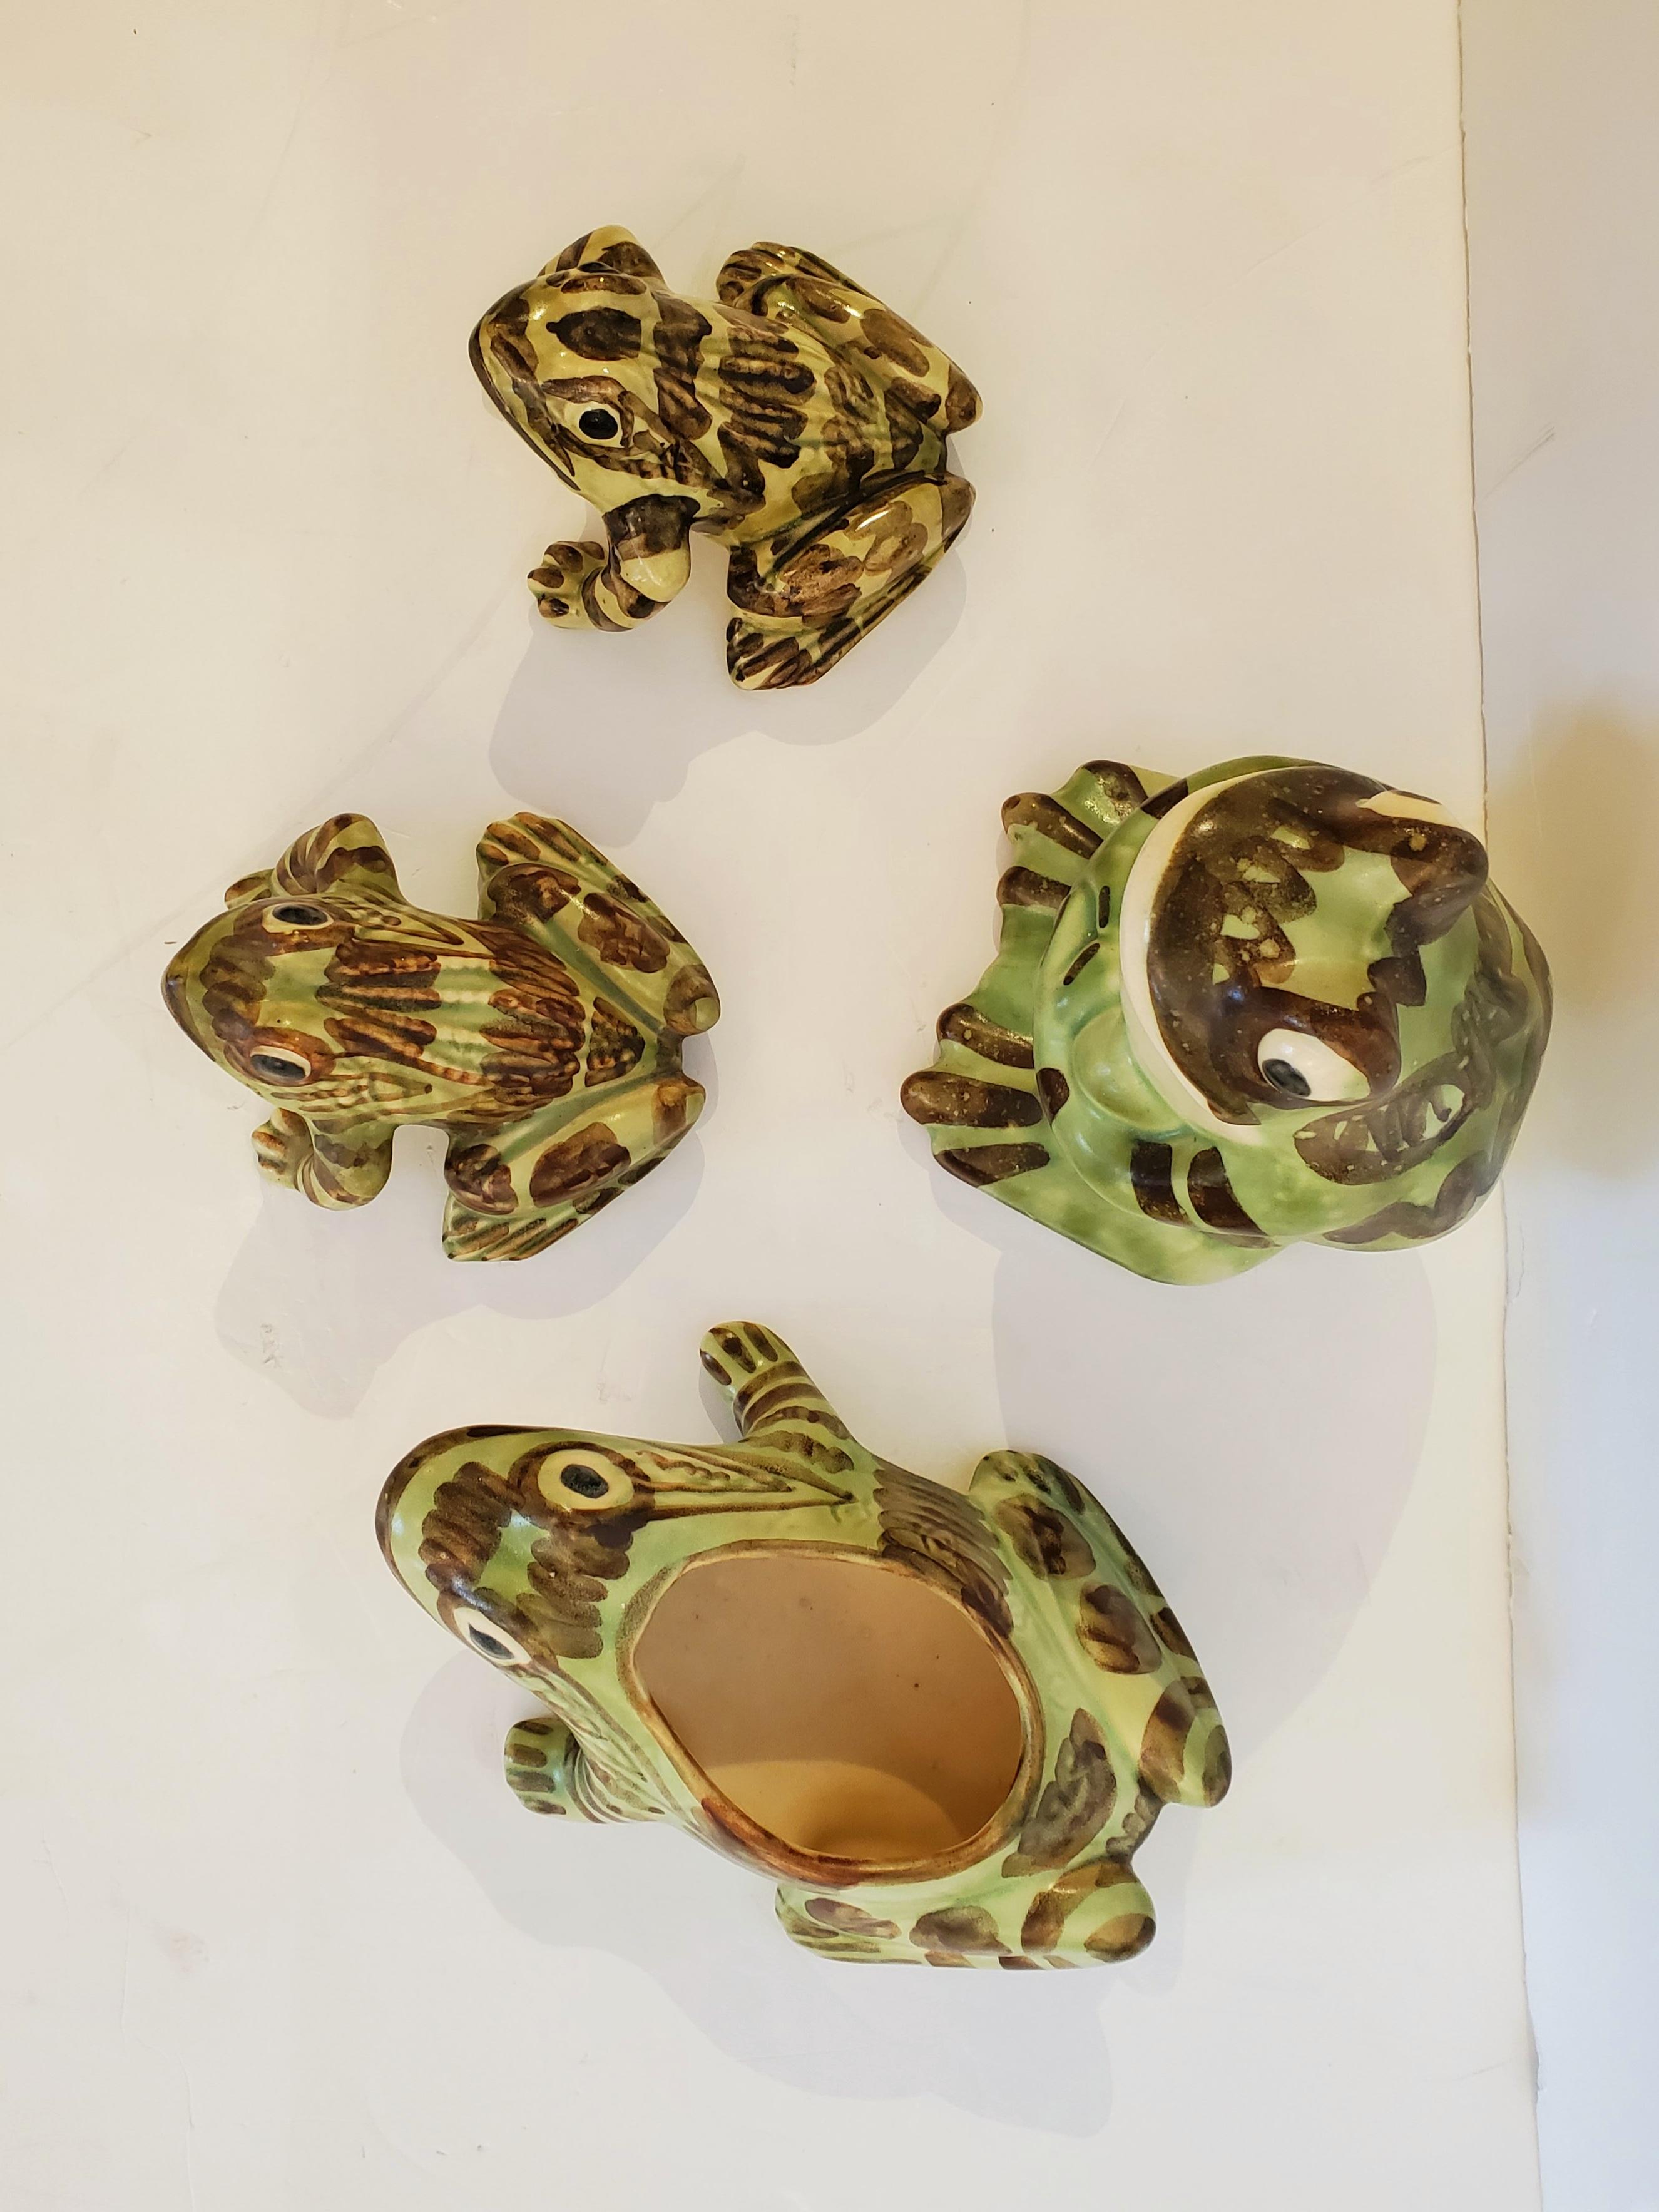 Adorable set of 3 ceramic frogs in light green, brown and cream.
Largest frog is sitting up with folded arms: 7 H x 5 W x 5.5 D
Frog with hole for use as a dish is in supine position: 8.5 x 6 x 3
Small frogs are poised ready to hop: 3 H x 5.5 D x 5